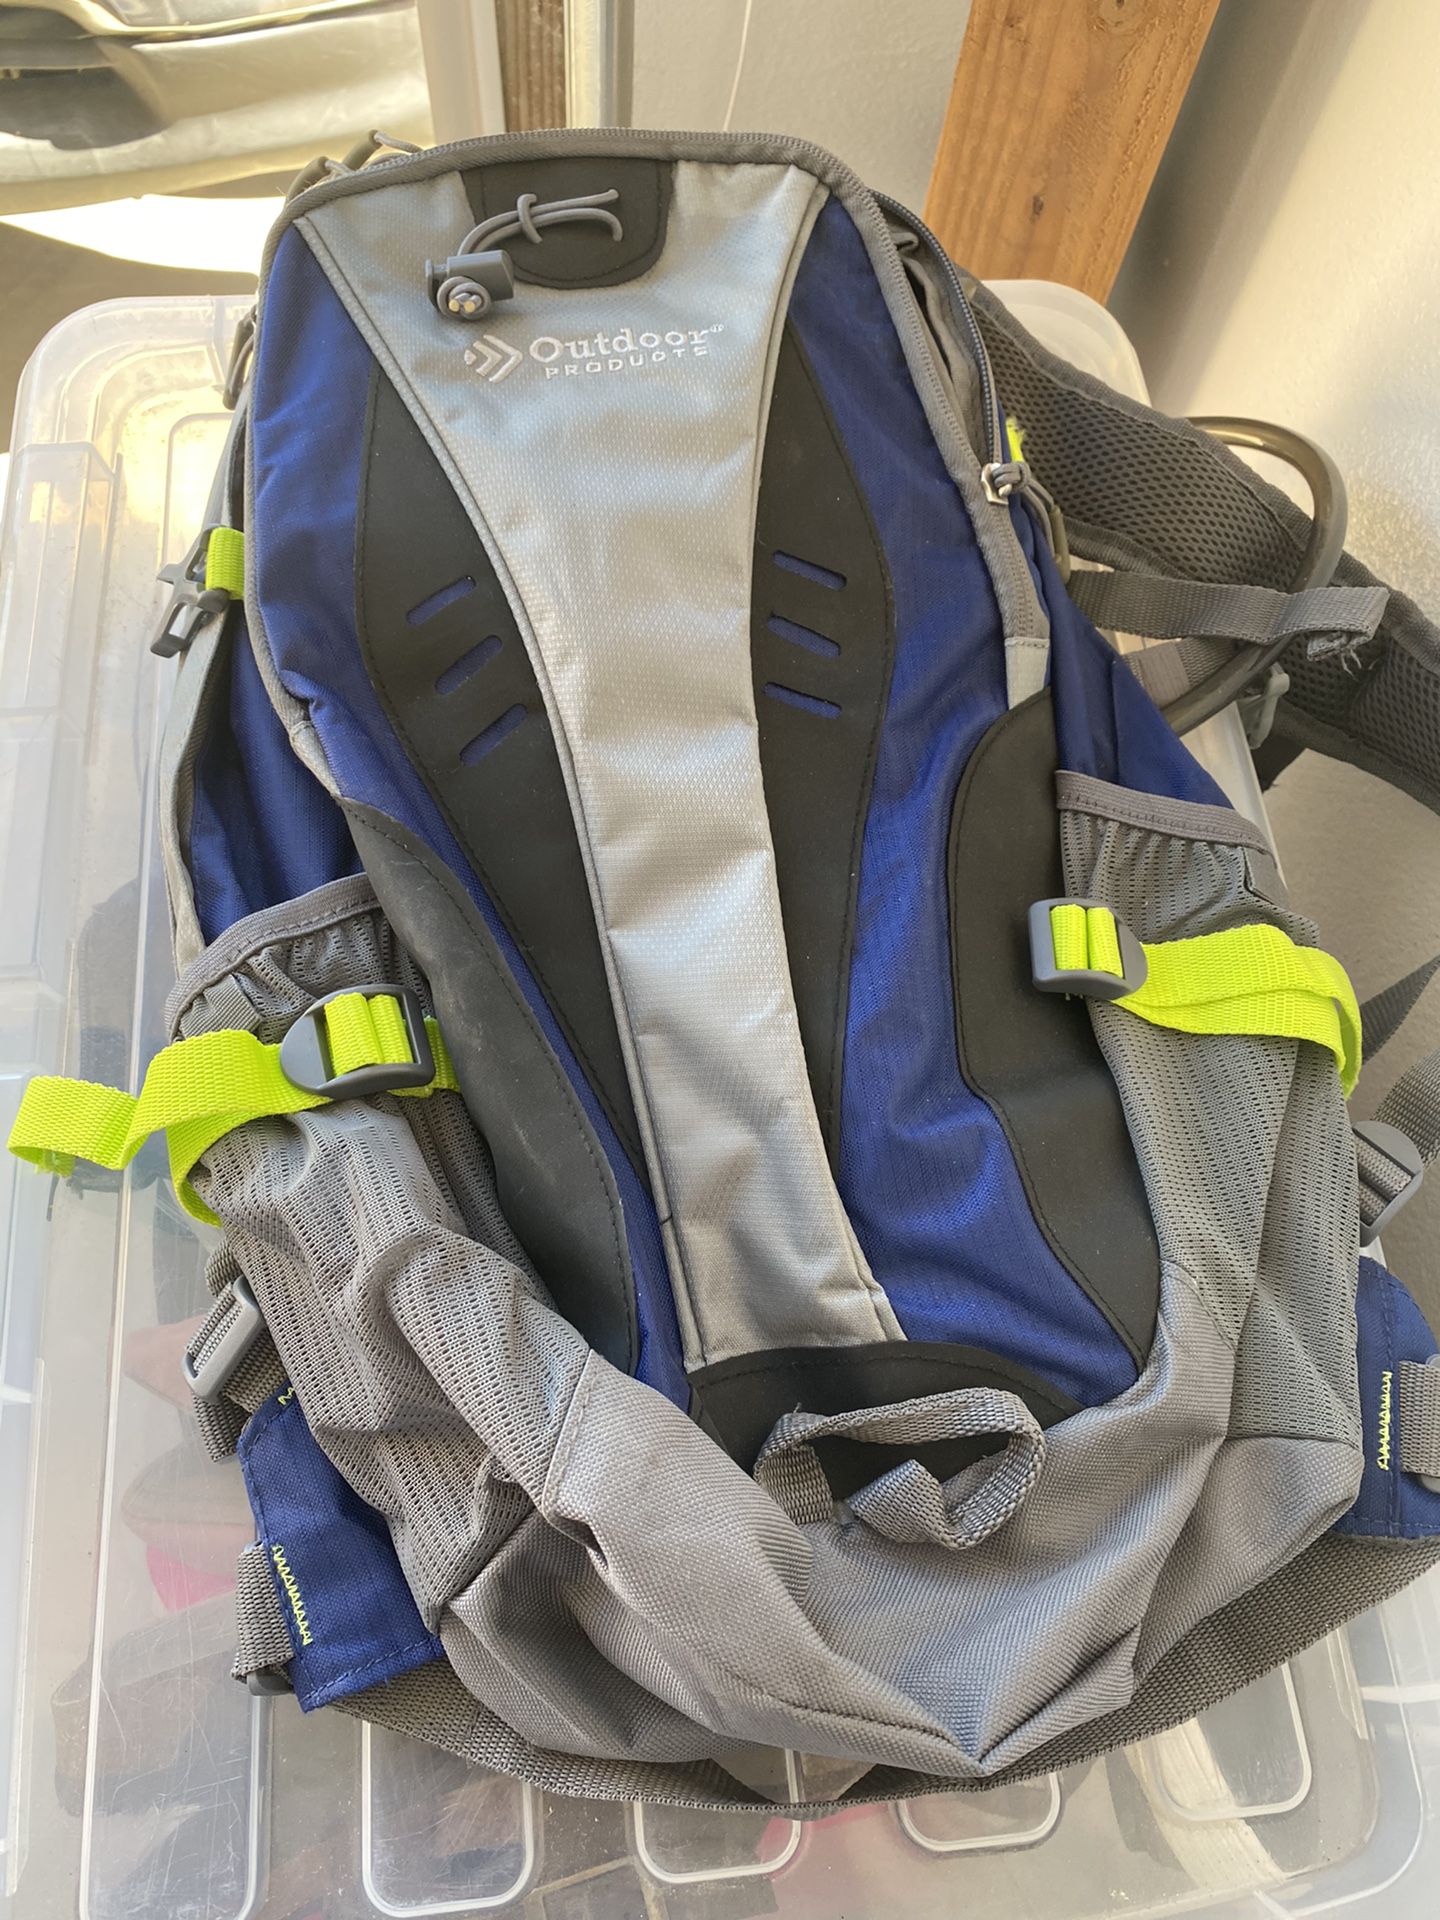 Outdoor Hiking Backpack $5